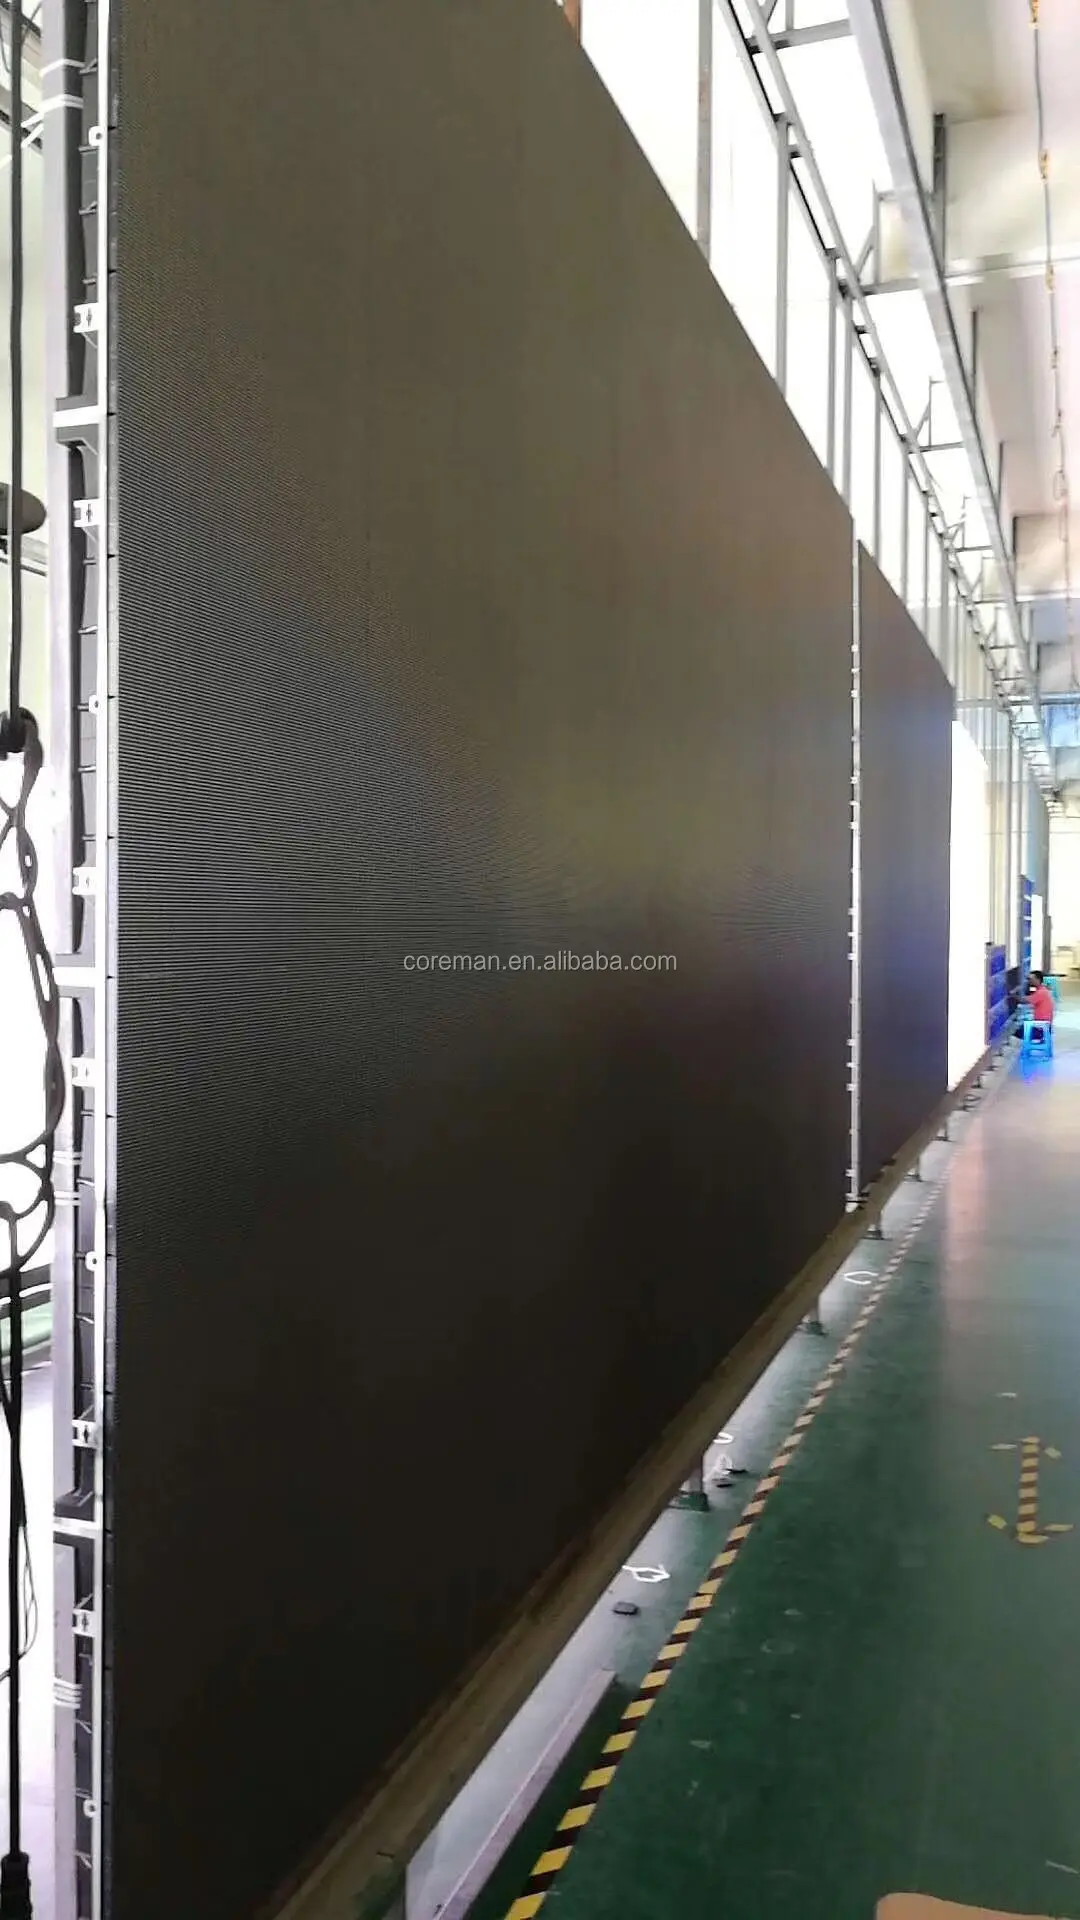 Outdoor P3.91 led advertising displays led display board large led display screen rentals P4.81 stage